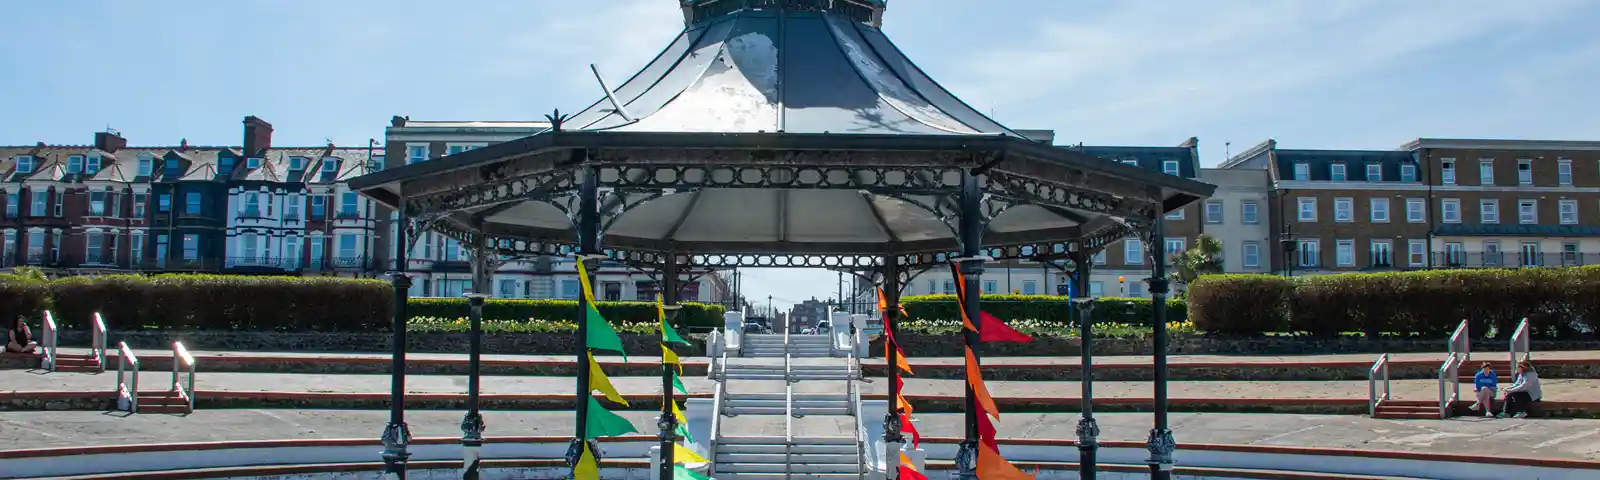 Cliftonville Bandstand 2 Credit Tourism At Thanet District Council